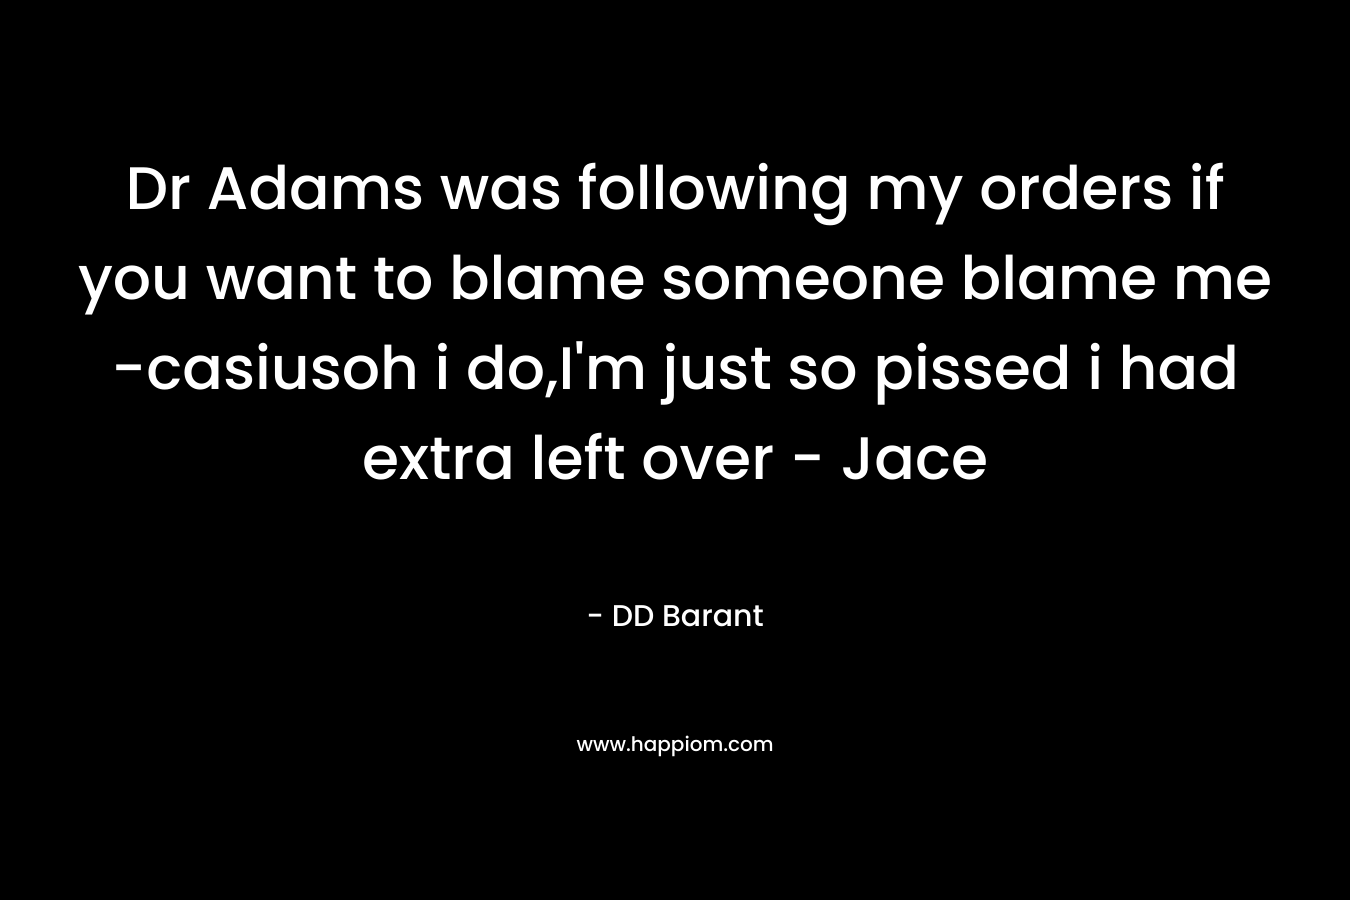 Dr Adams was following my orders if you want to blame someone blame me -casiusoh i do,I'm just so pissed i had extra left over - Jace